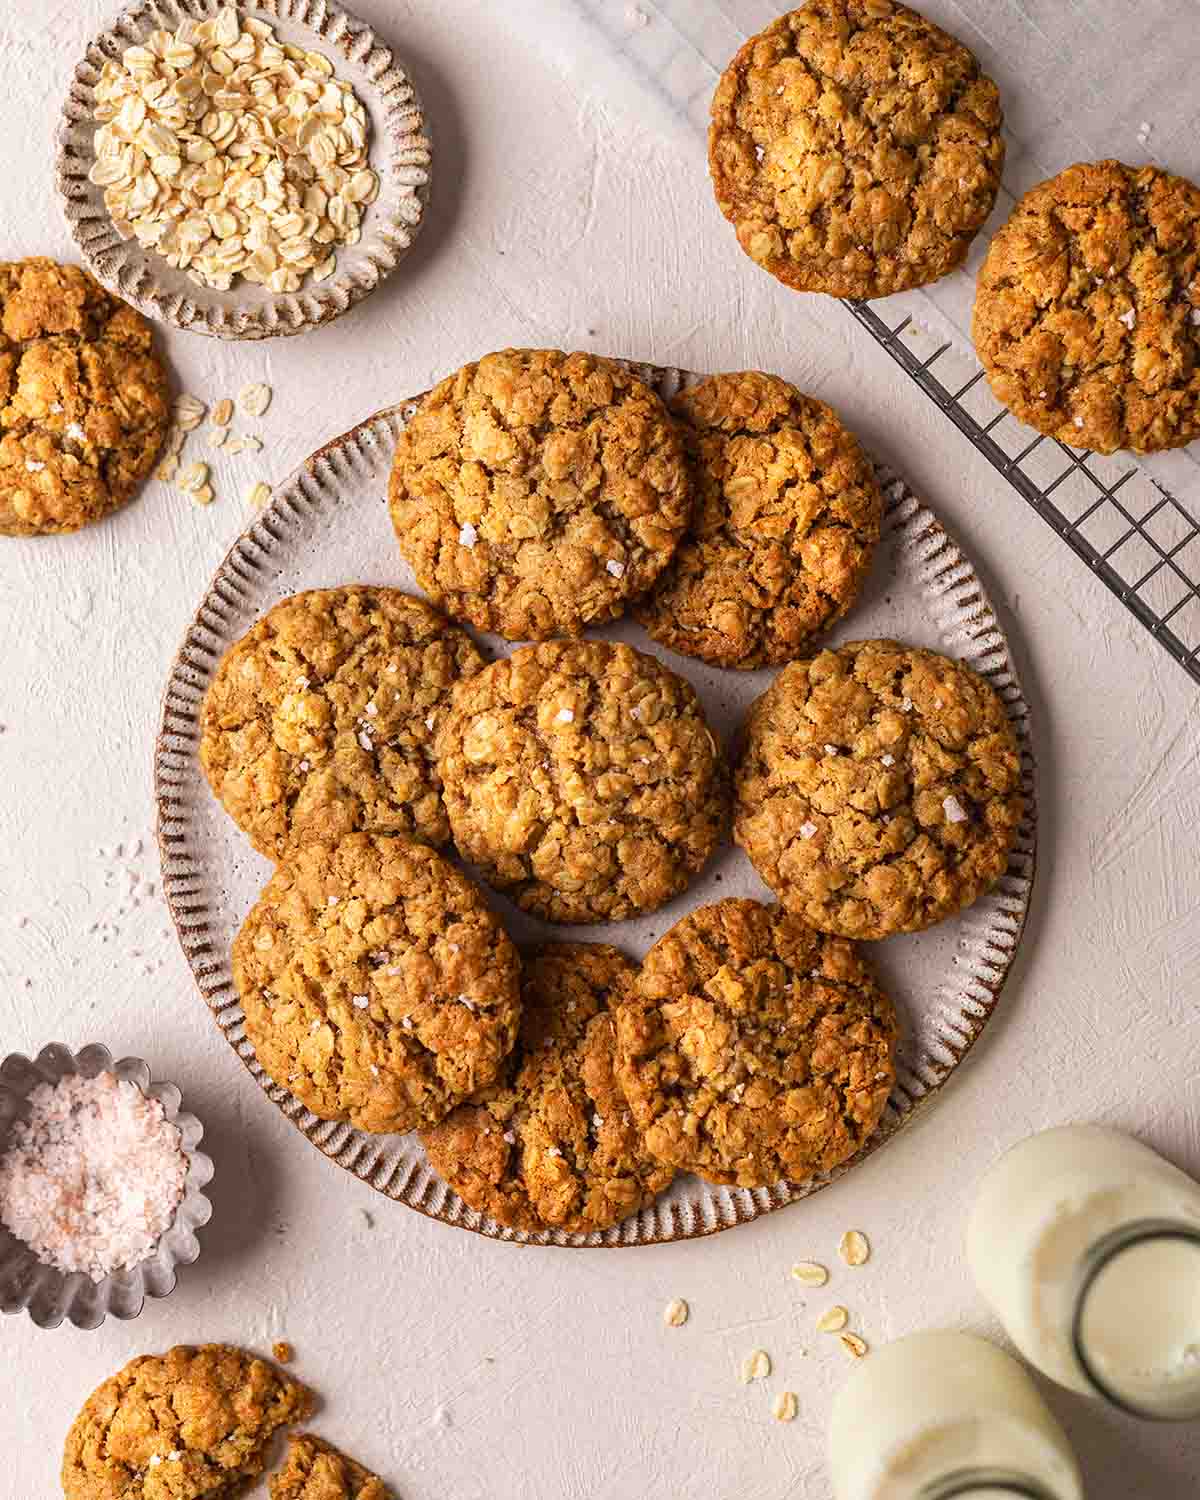 Overhead image of oatmeal cookies on rustic plate with ingredients surrounding the plate.